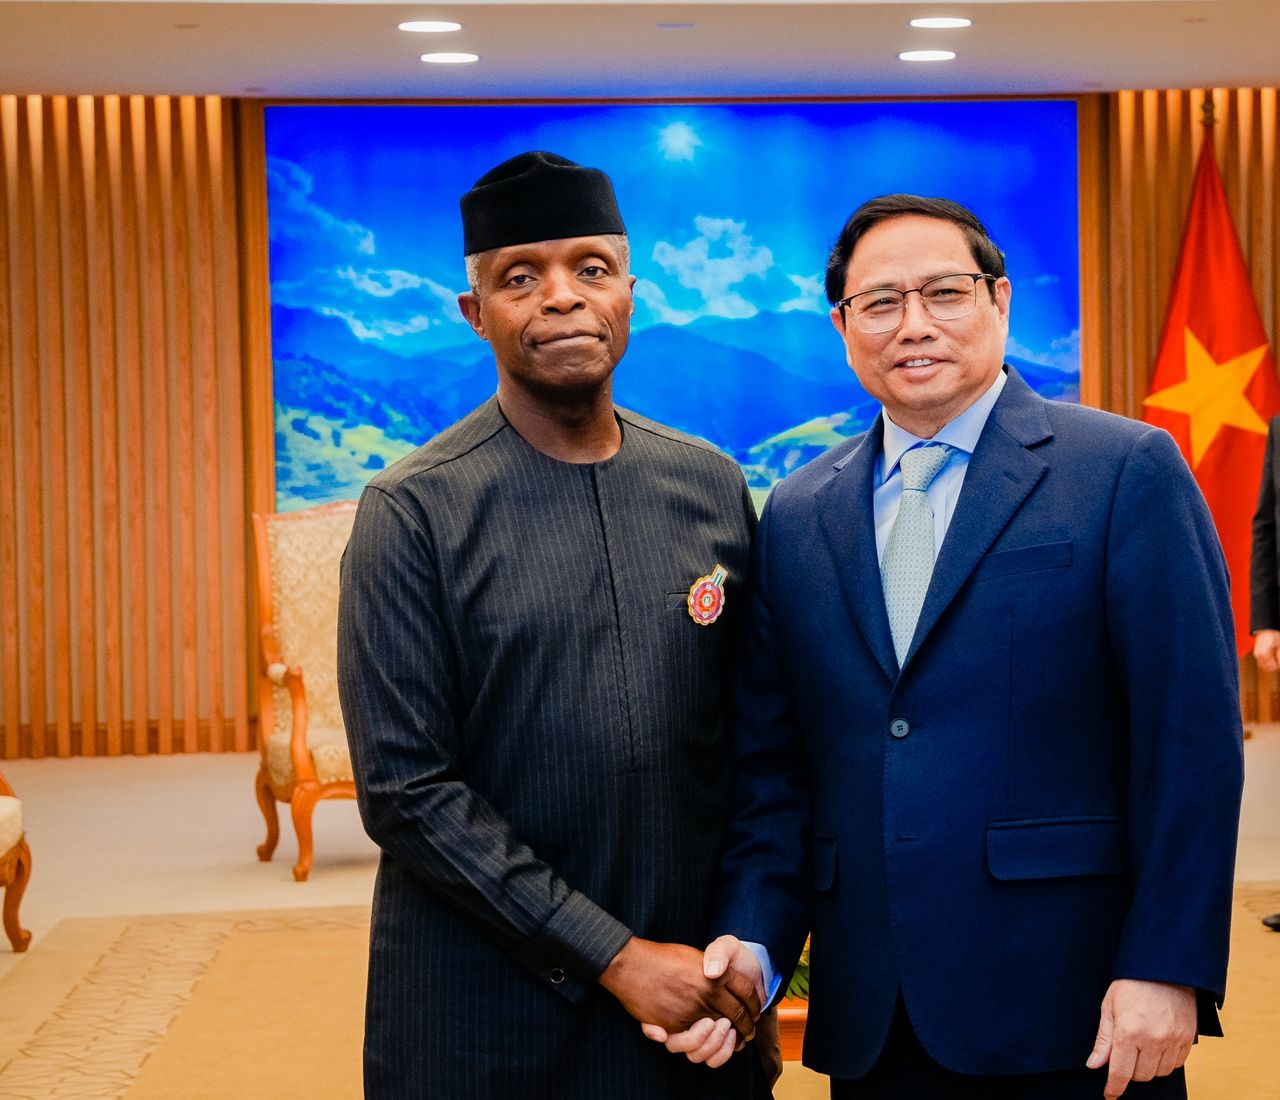 VP Osinbajo Meets With Prime Minister Of Vietnam, His Excellency Pham Minh Chinh On 05/12/2022